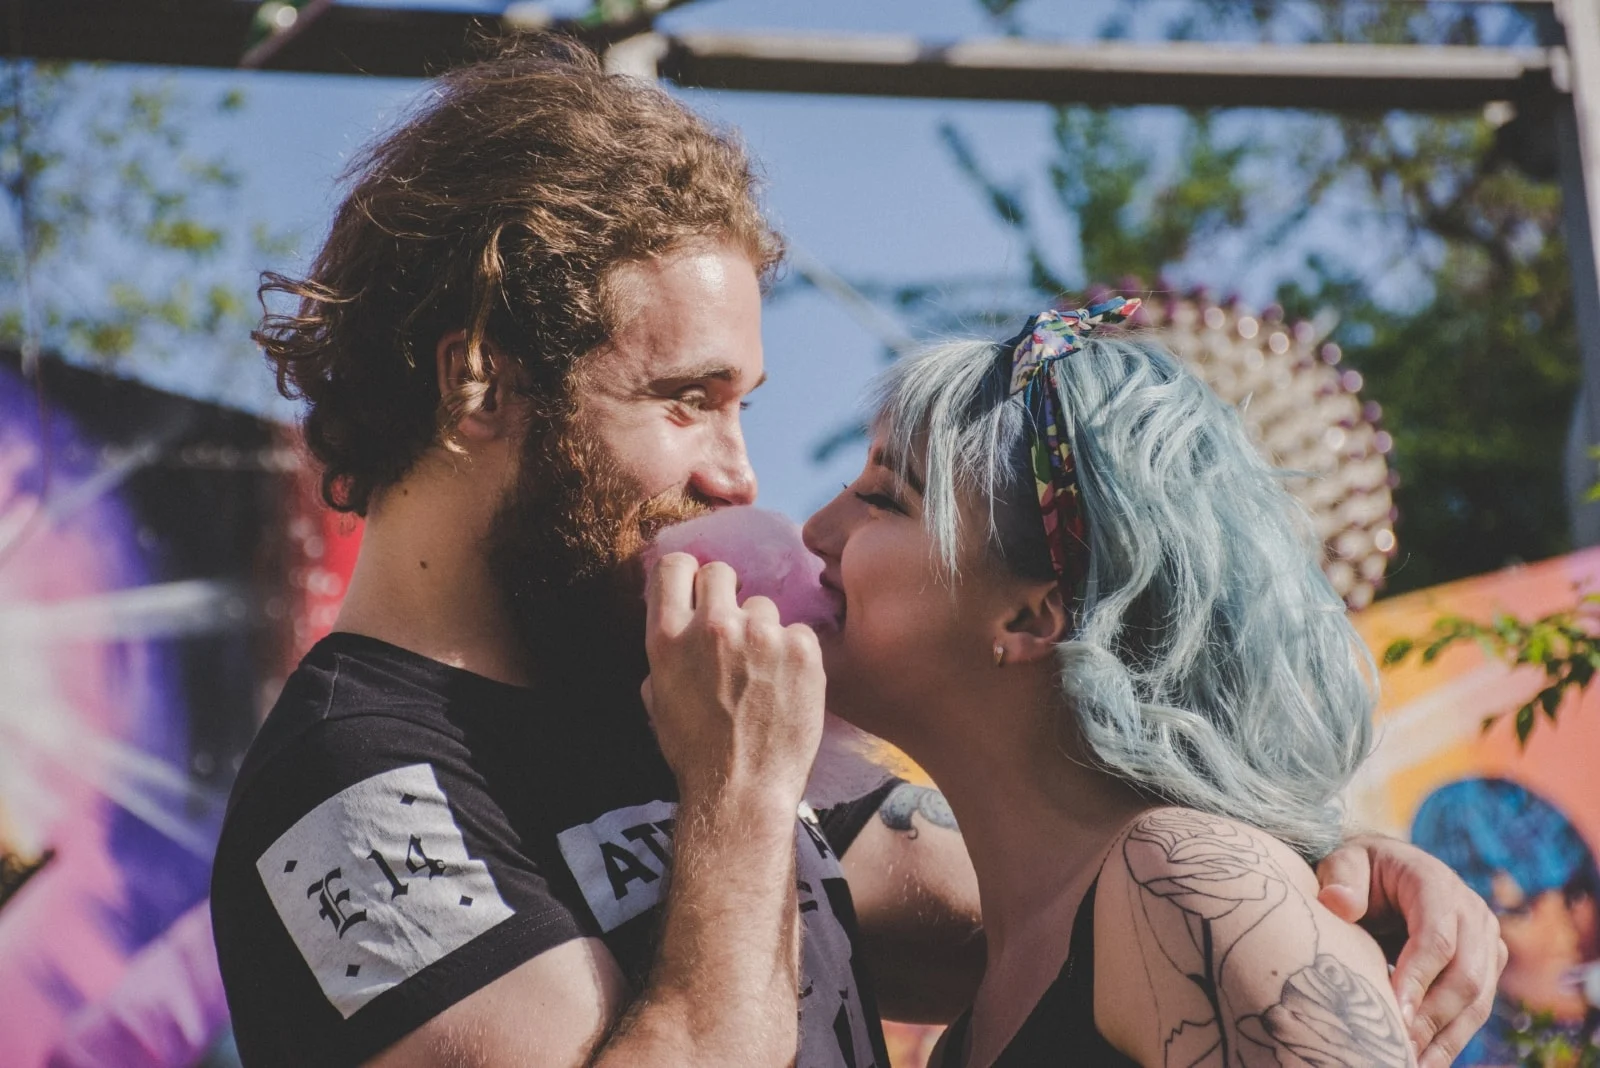 man and woman smiling while eating cotton candy